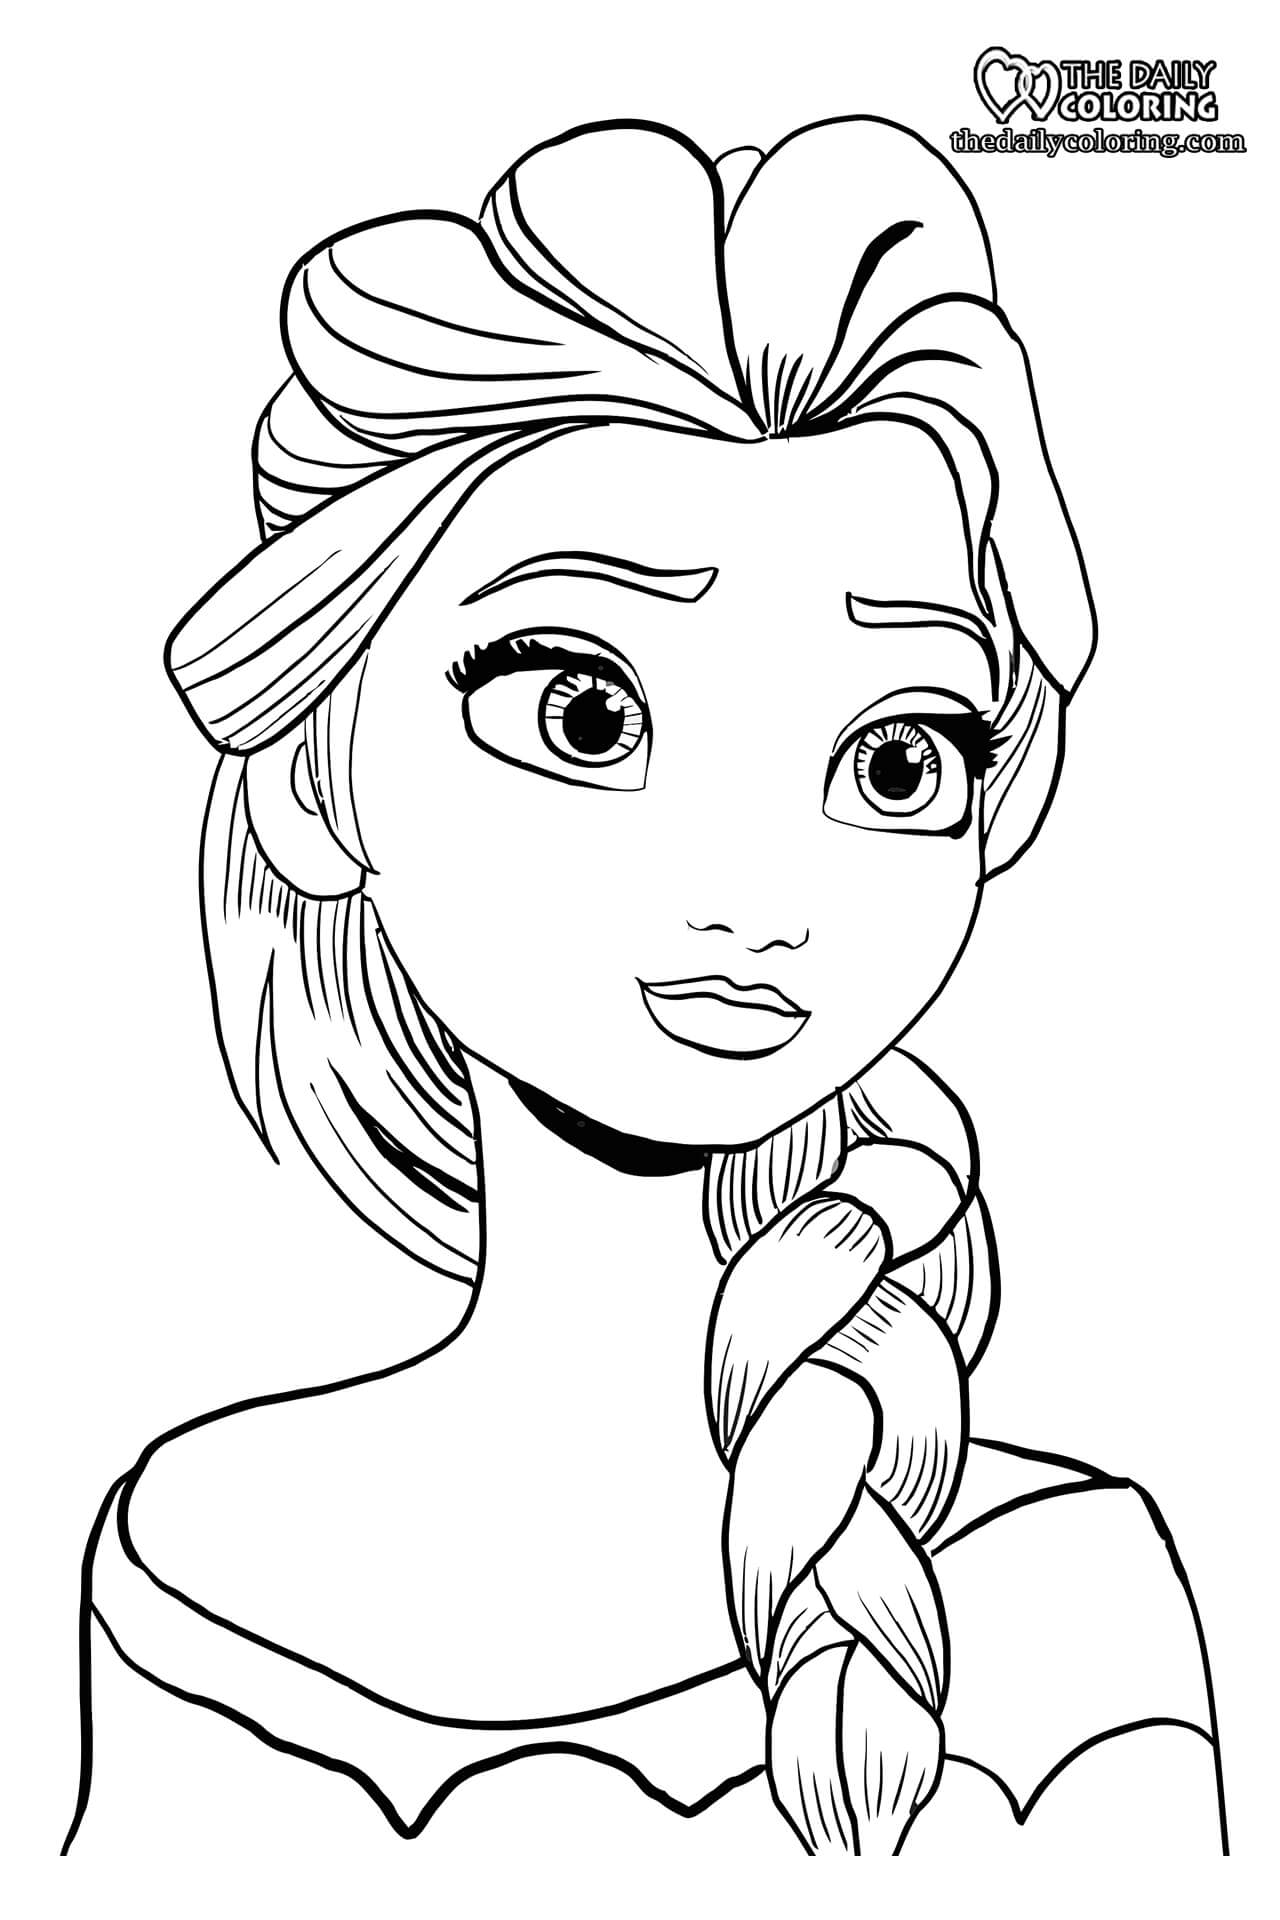 Elsa and Anna Coloring Pages [21 Pages]   The Daily Coloring